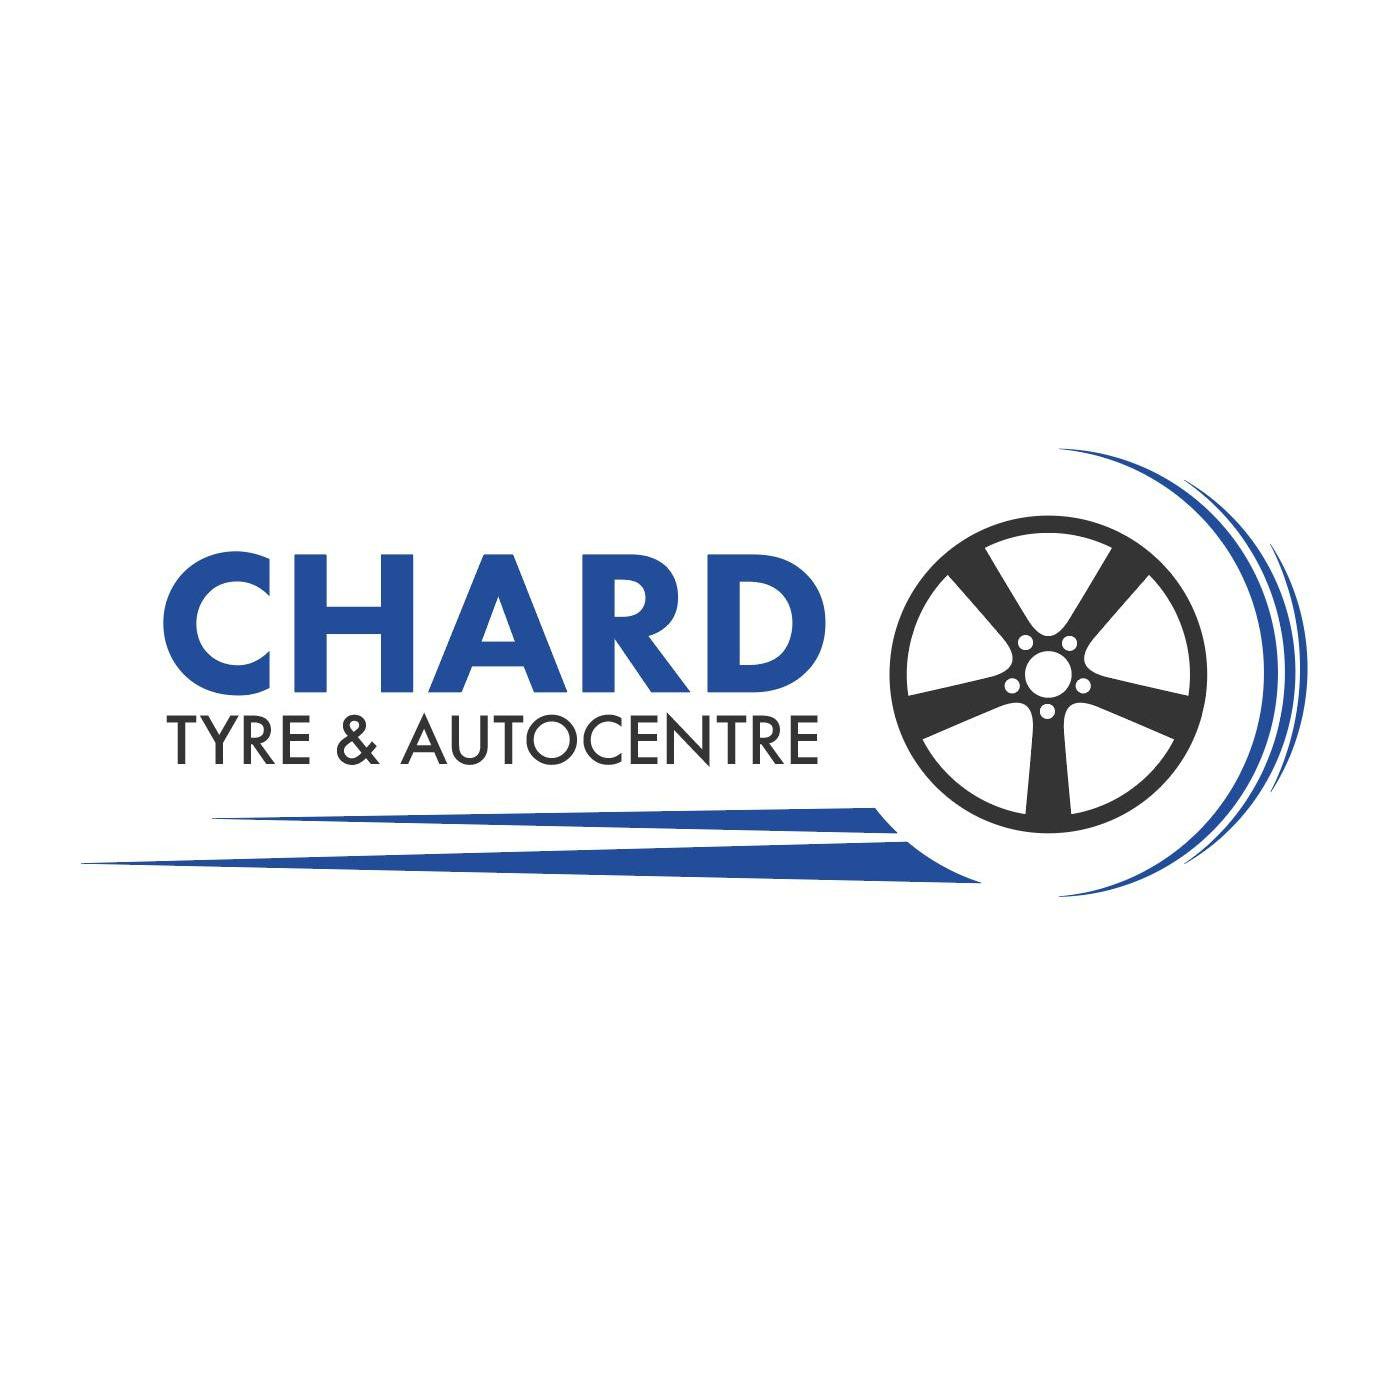 CHARD TYRES & AUTO CENTRE - Chard, Somerset TA20 1EP - 01460 247222 | ShowMeLocal.com